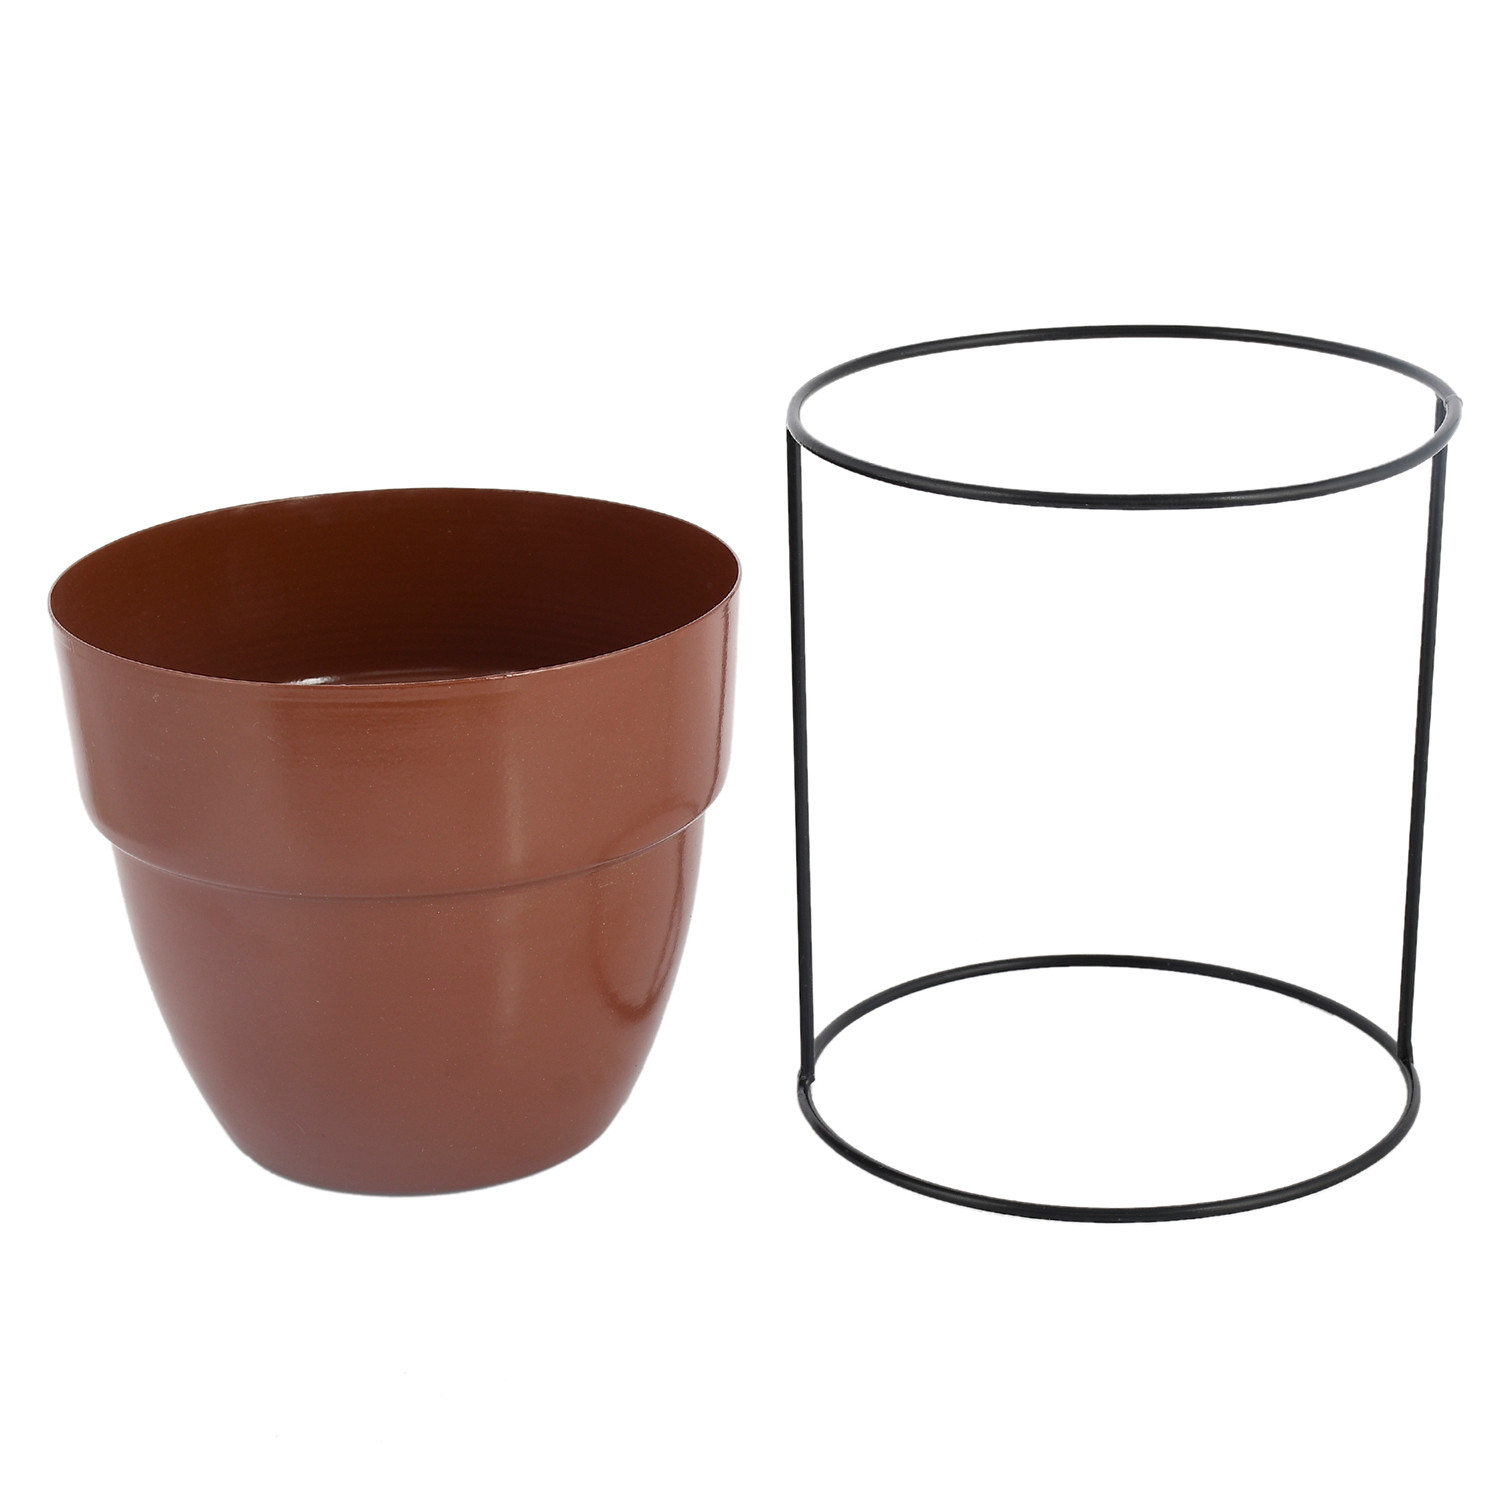 Kuber Industries Metal Planter|Decorative Modern Indoor Desk Pot|Iron Table Stand Flower Planter Pot For Home Décor,8.5 Inches,Pack of 2 (Gray & Terracotta)